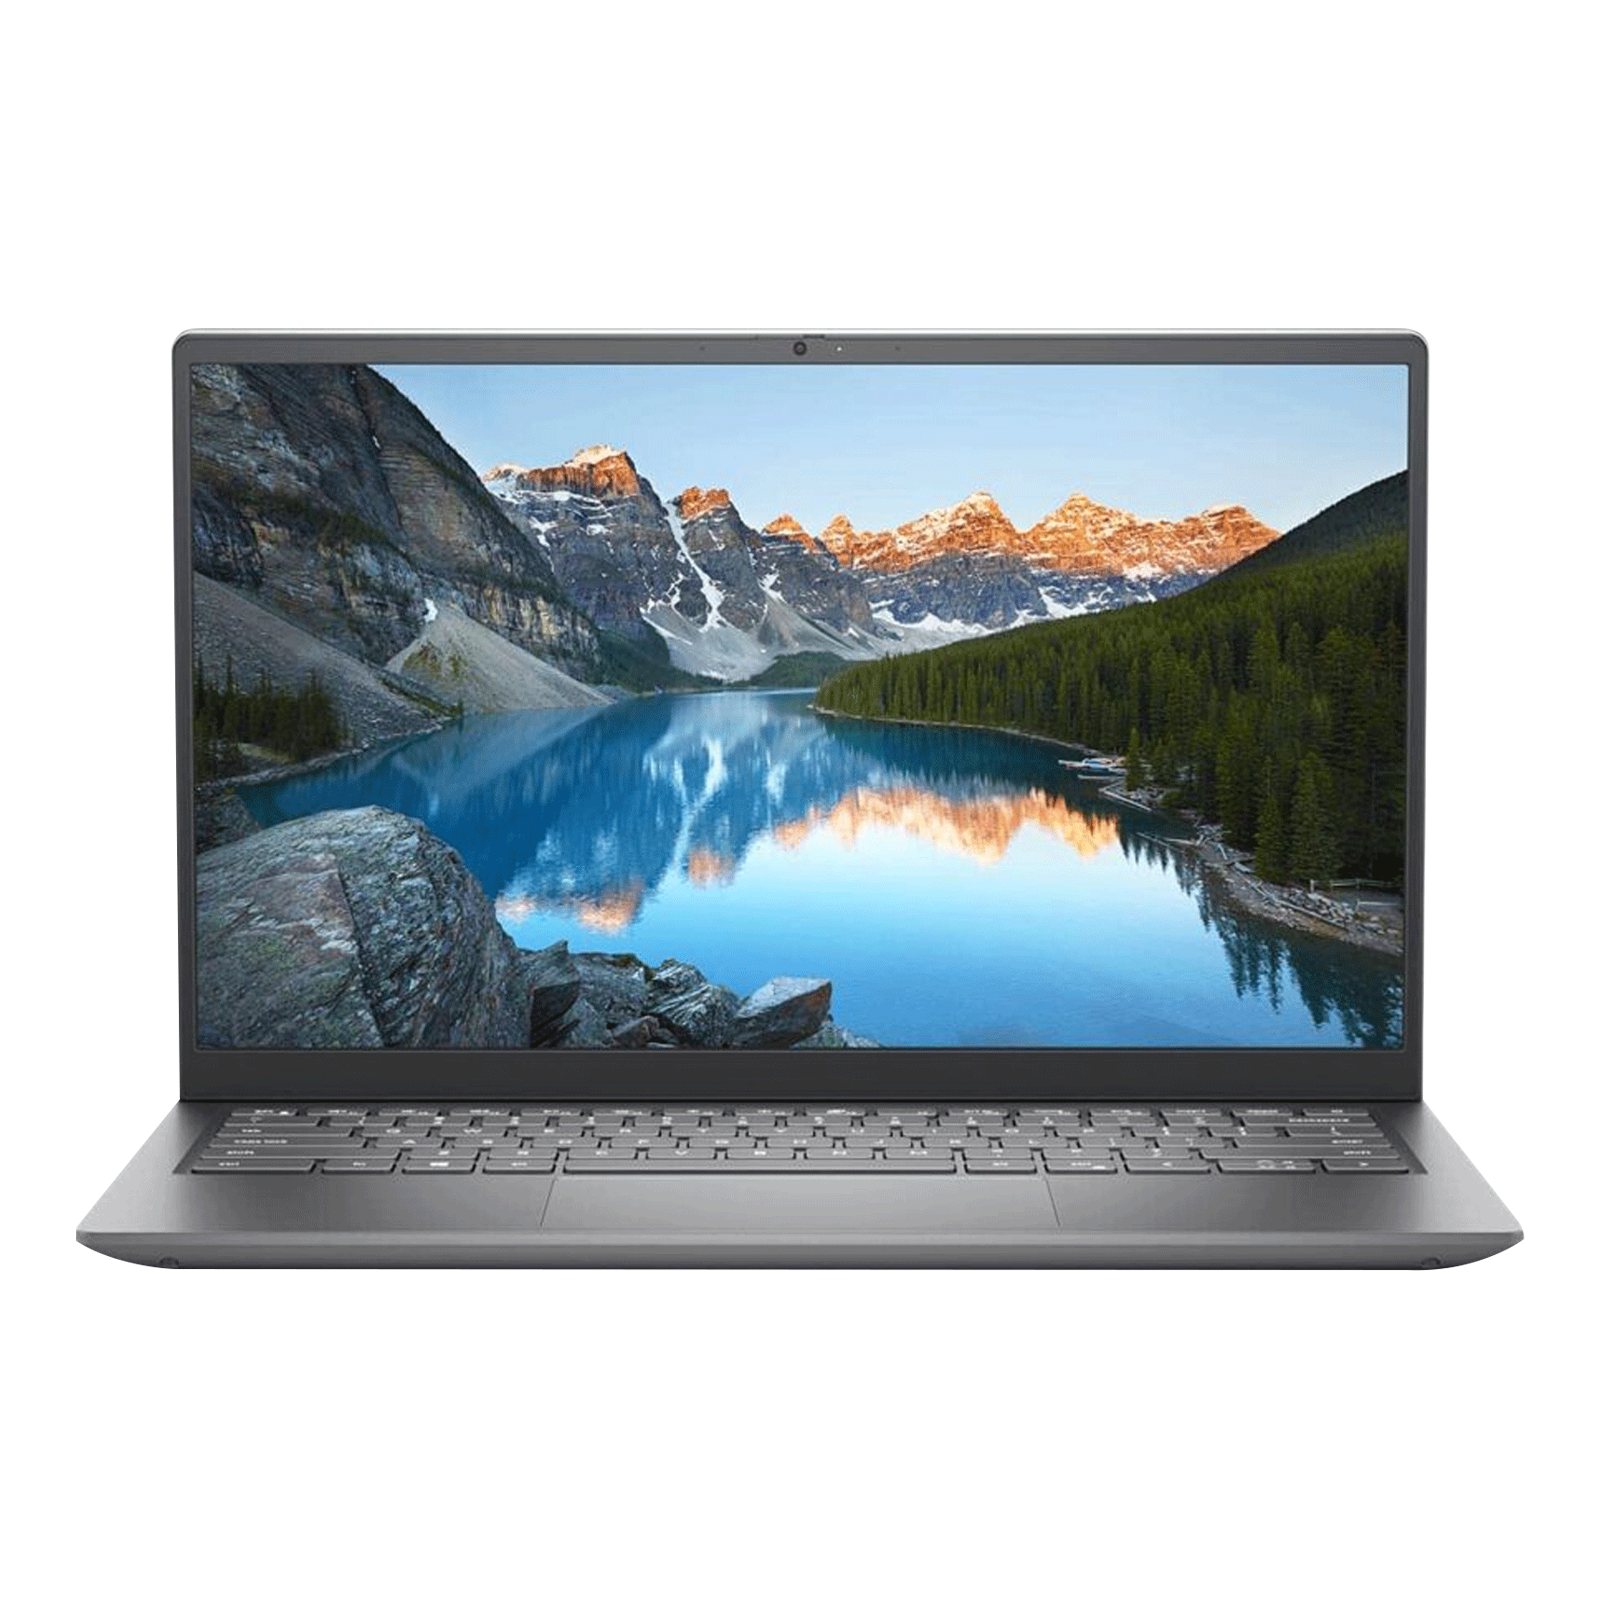 Dell Inspiron 5410 Intel Core i5 11th Gen (14 inch, 8GB, 512GB, Windows 10, MS Office 2019, NVIDIA GeForce MX350 Graphics, FHD IPS Display, Silver Metal, D560468WIN9S)_1